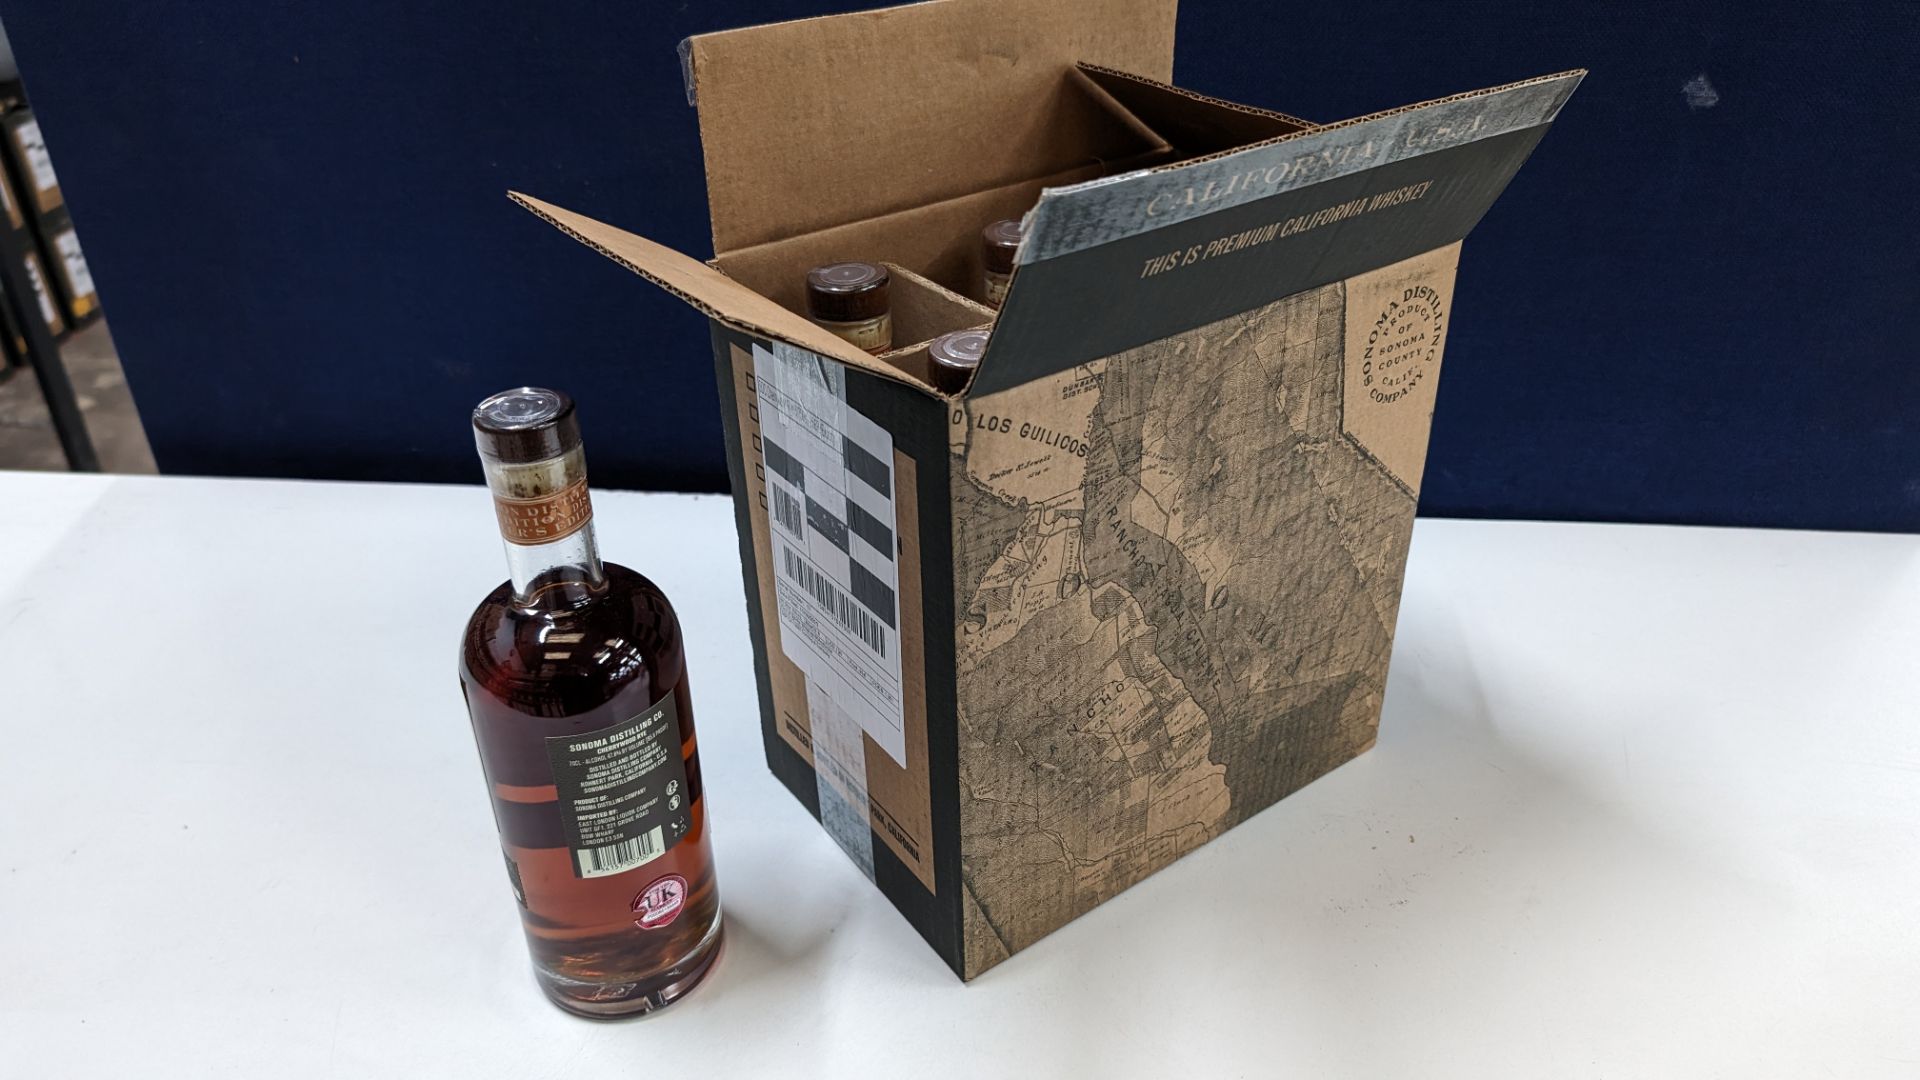 6 off 700ml bottles of Sonoma Cherrywood Rye Whiskey. In Sonoma branded box which includes bottling - Image 9 of 9